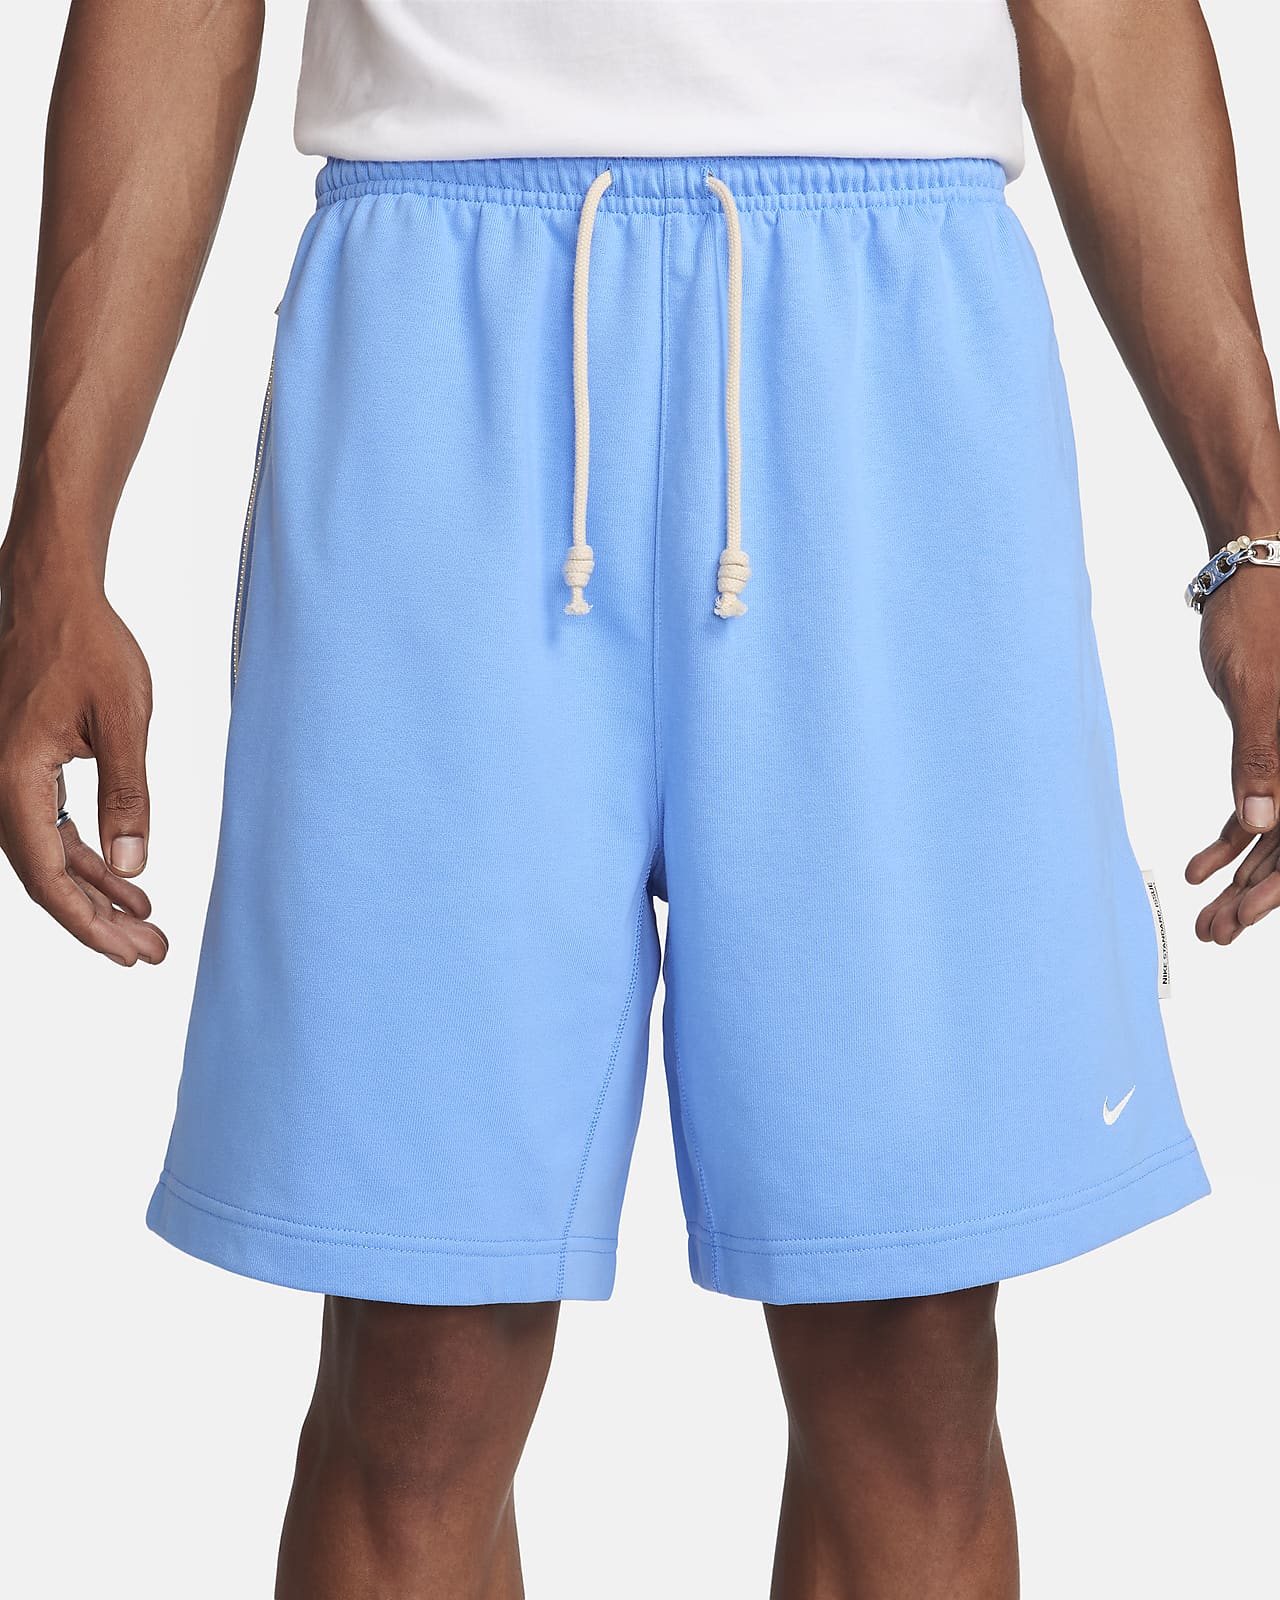 Teal Ultra Shorts – Adapt To Official